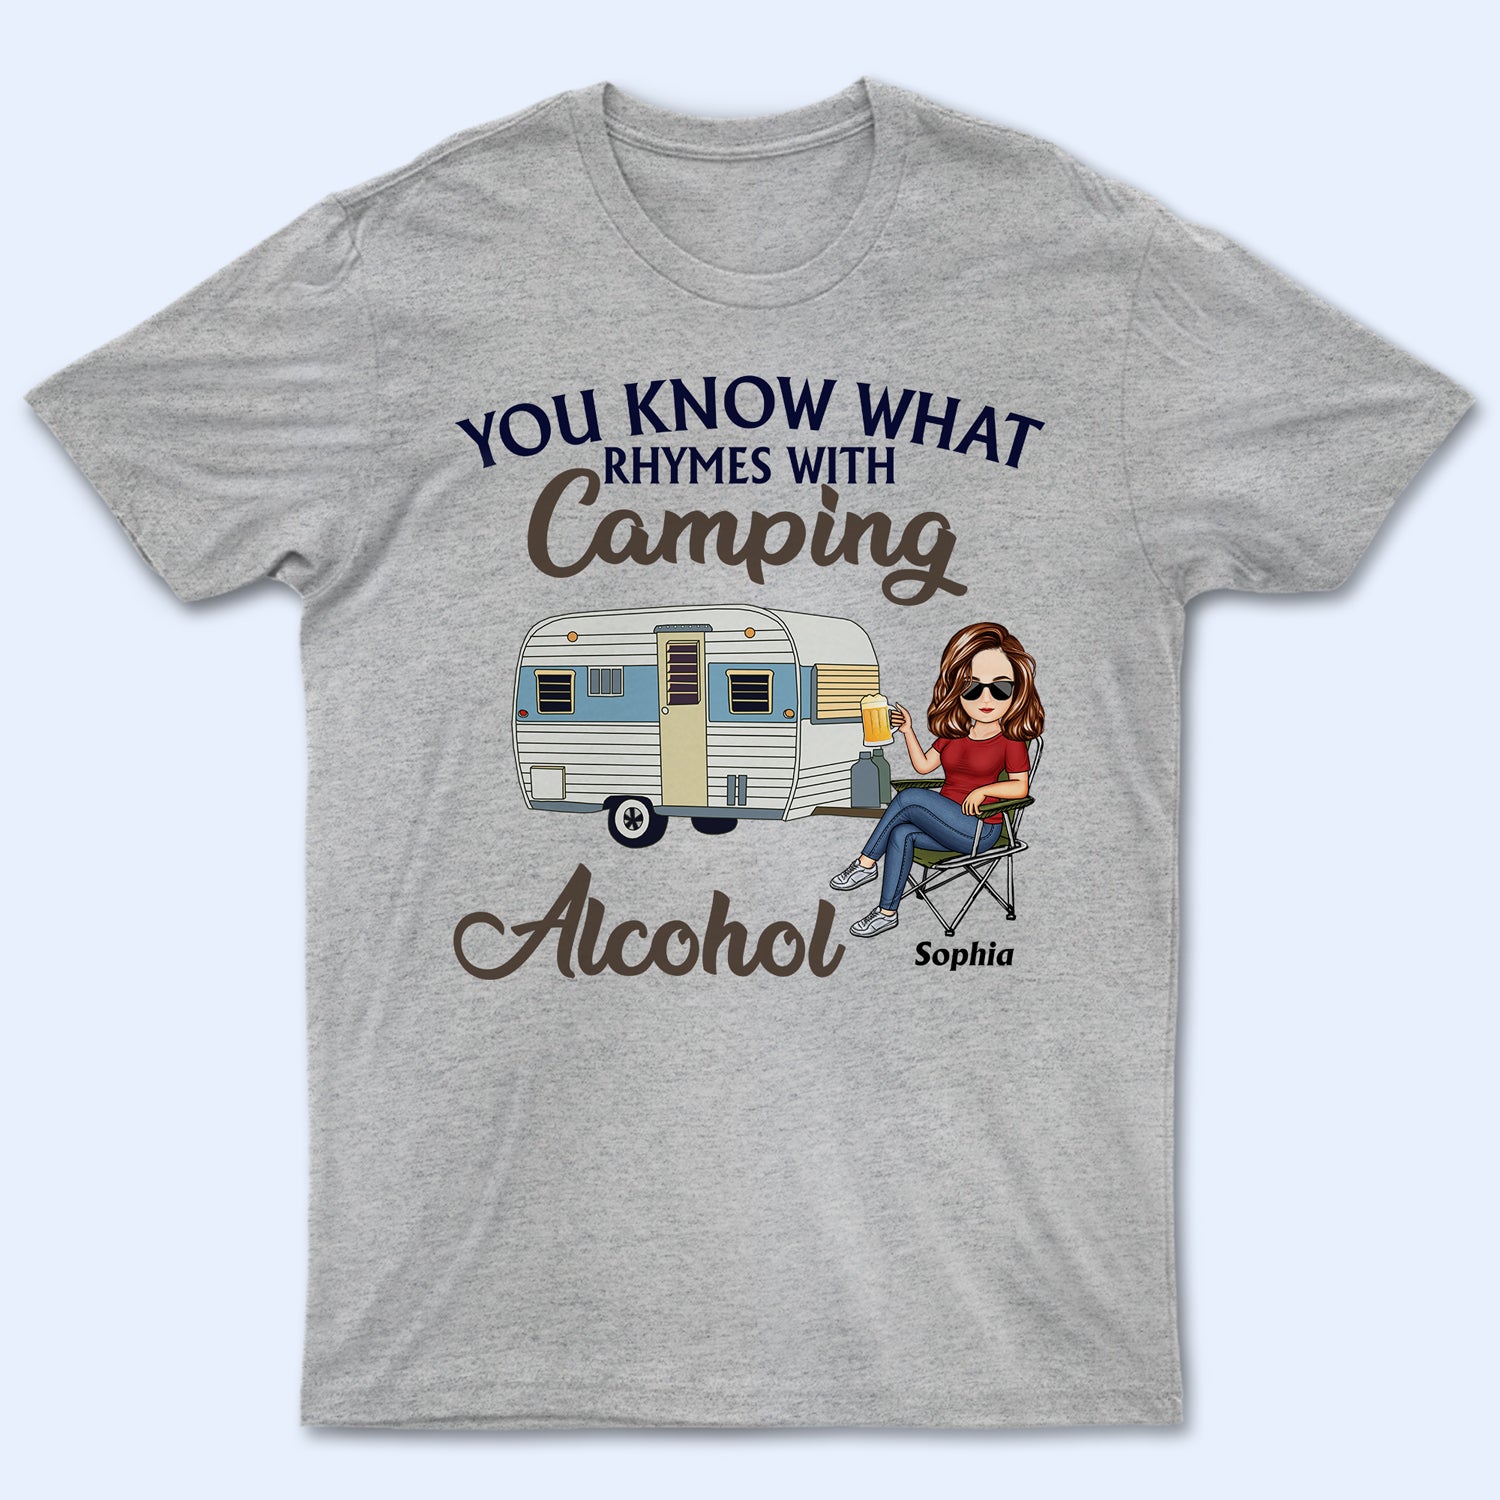 You Know What Rhymes With Camping Alcohol - Birthday, Funny Gift For Her, Campers - Personalized Custom T Shirt